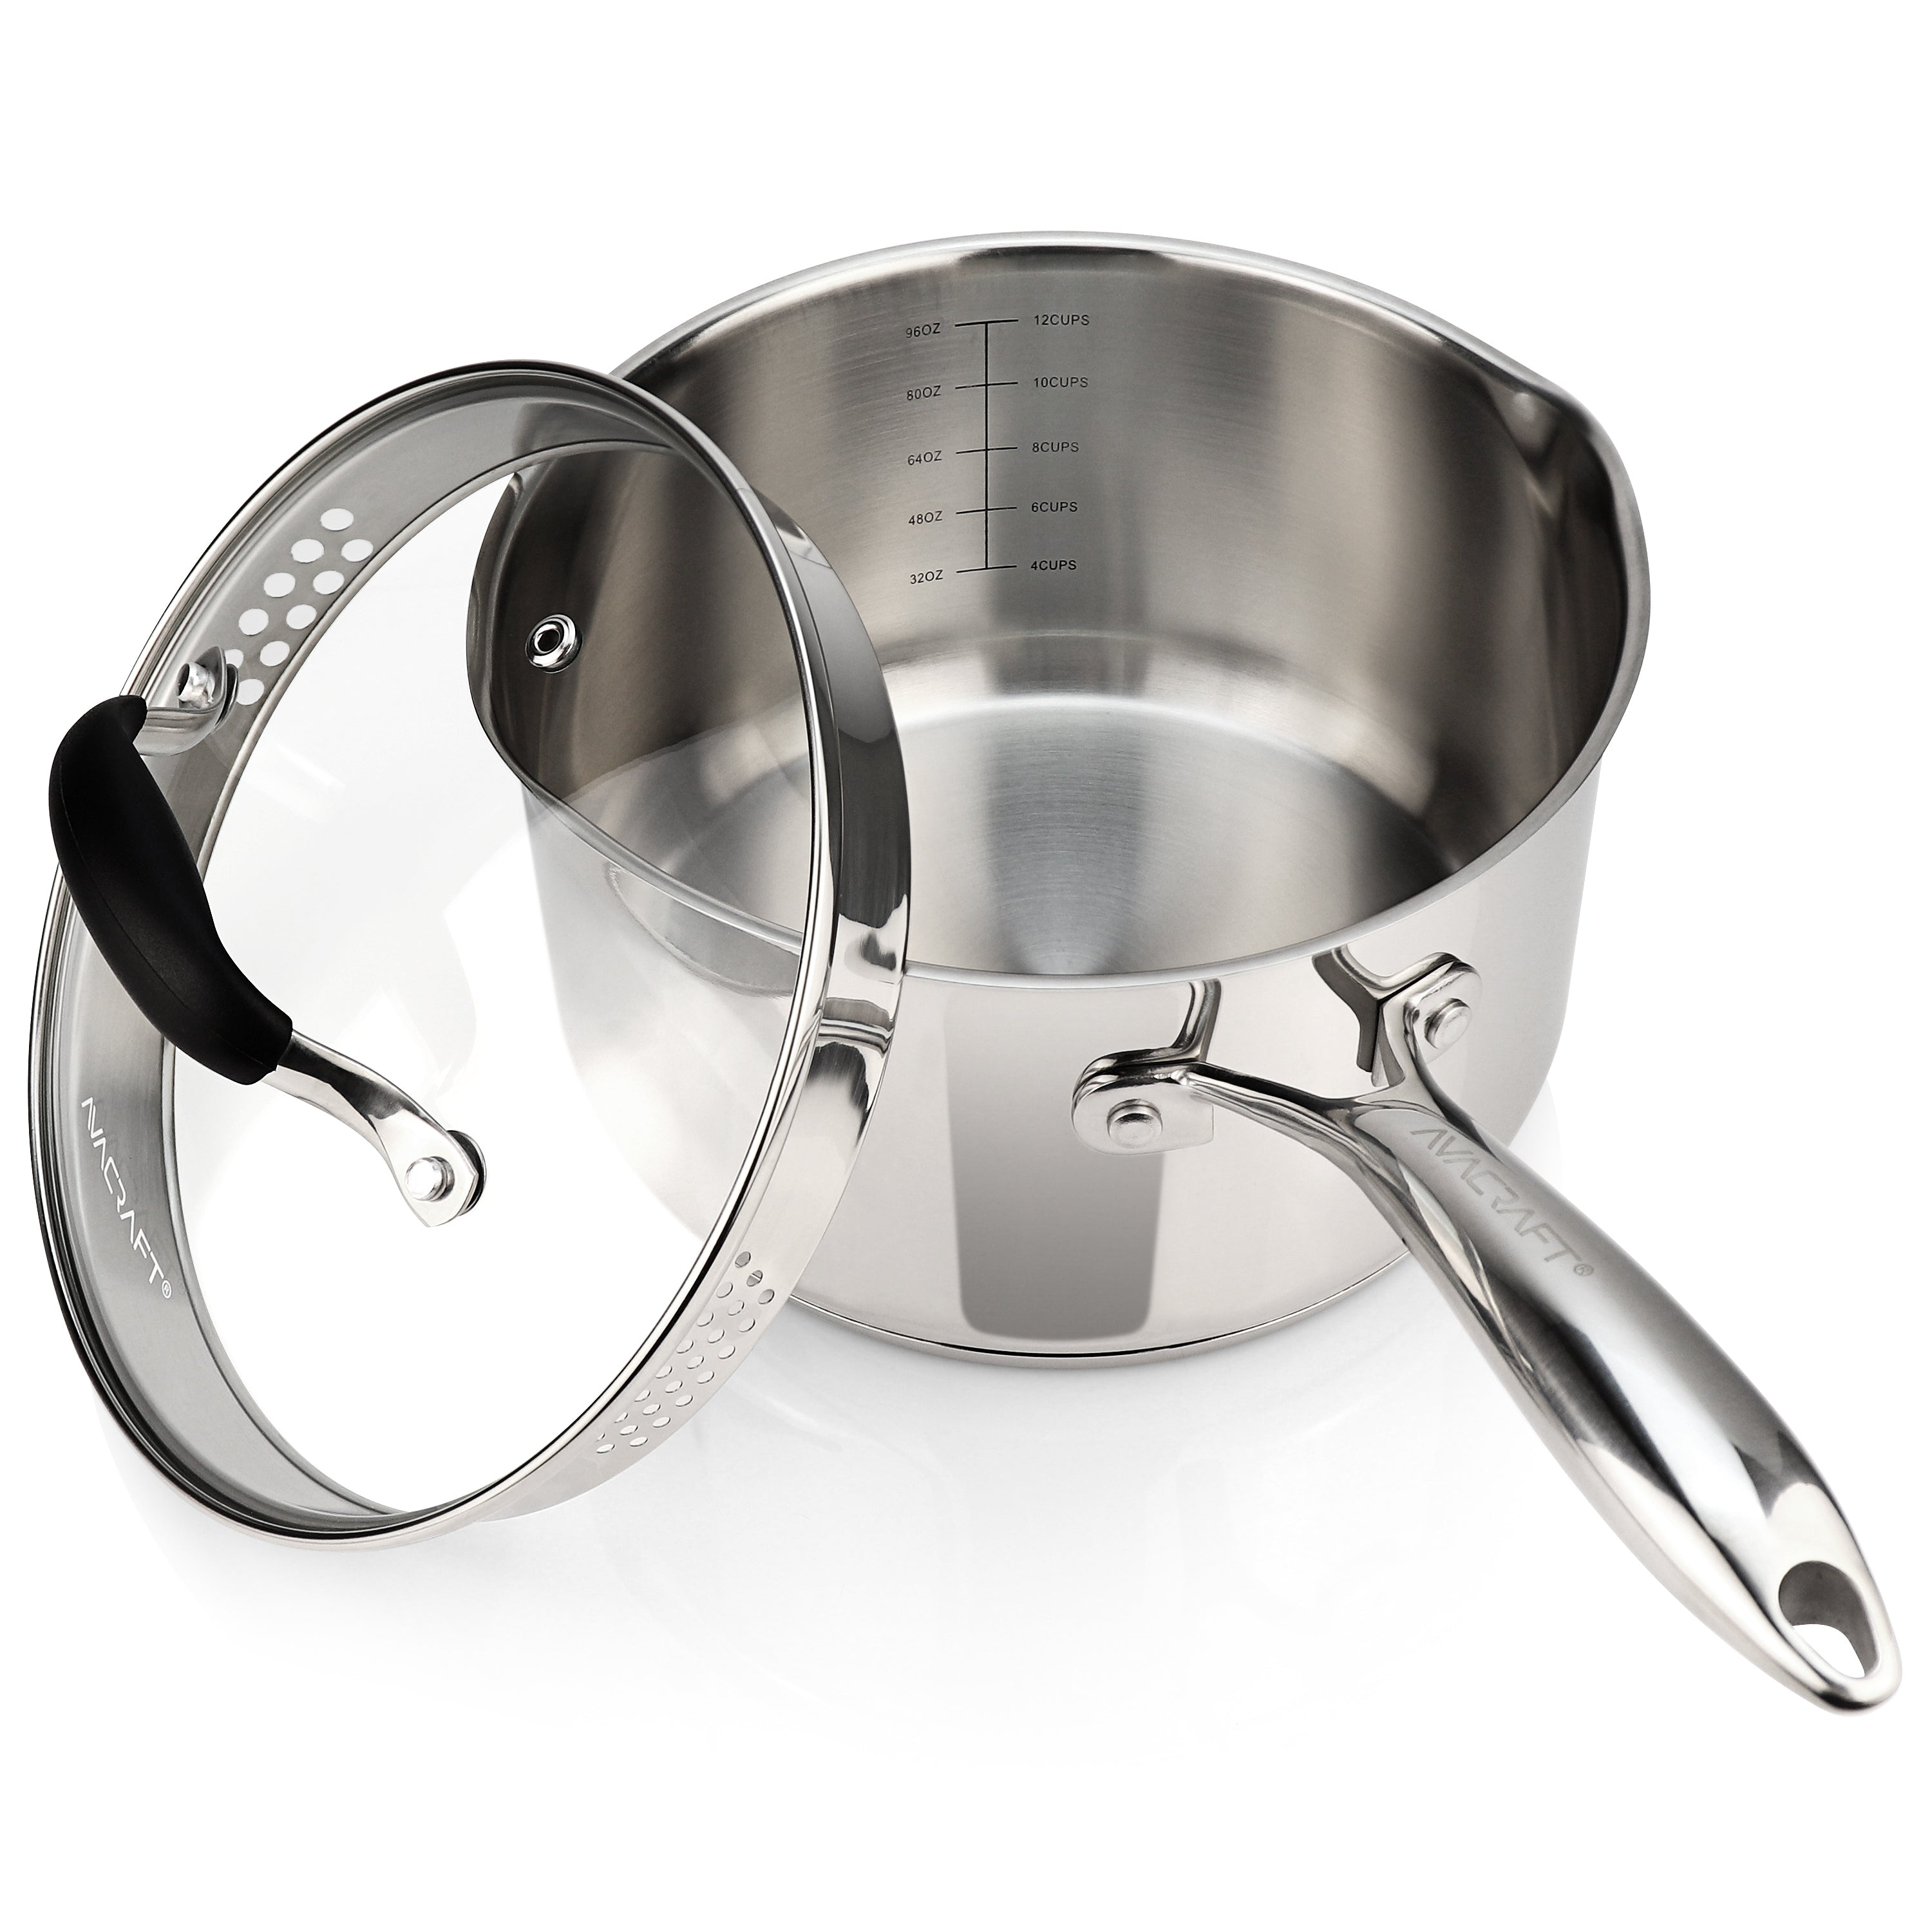 Rorence Stainless Steel Sauce pan: Saucepan with Pour Spouts, Capsule